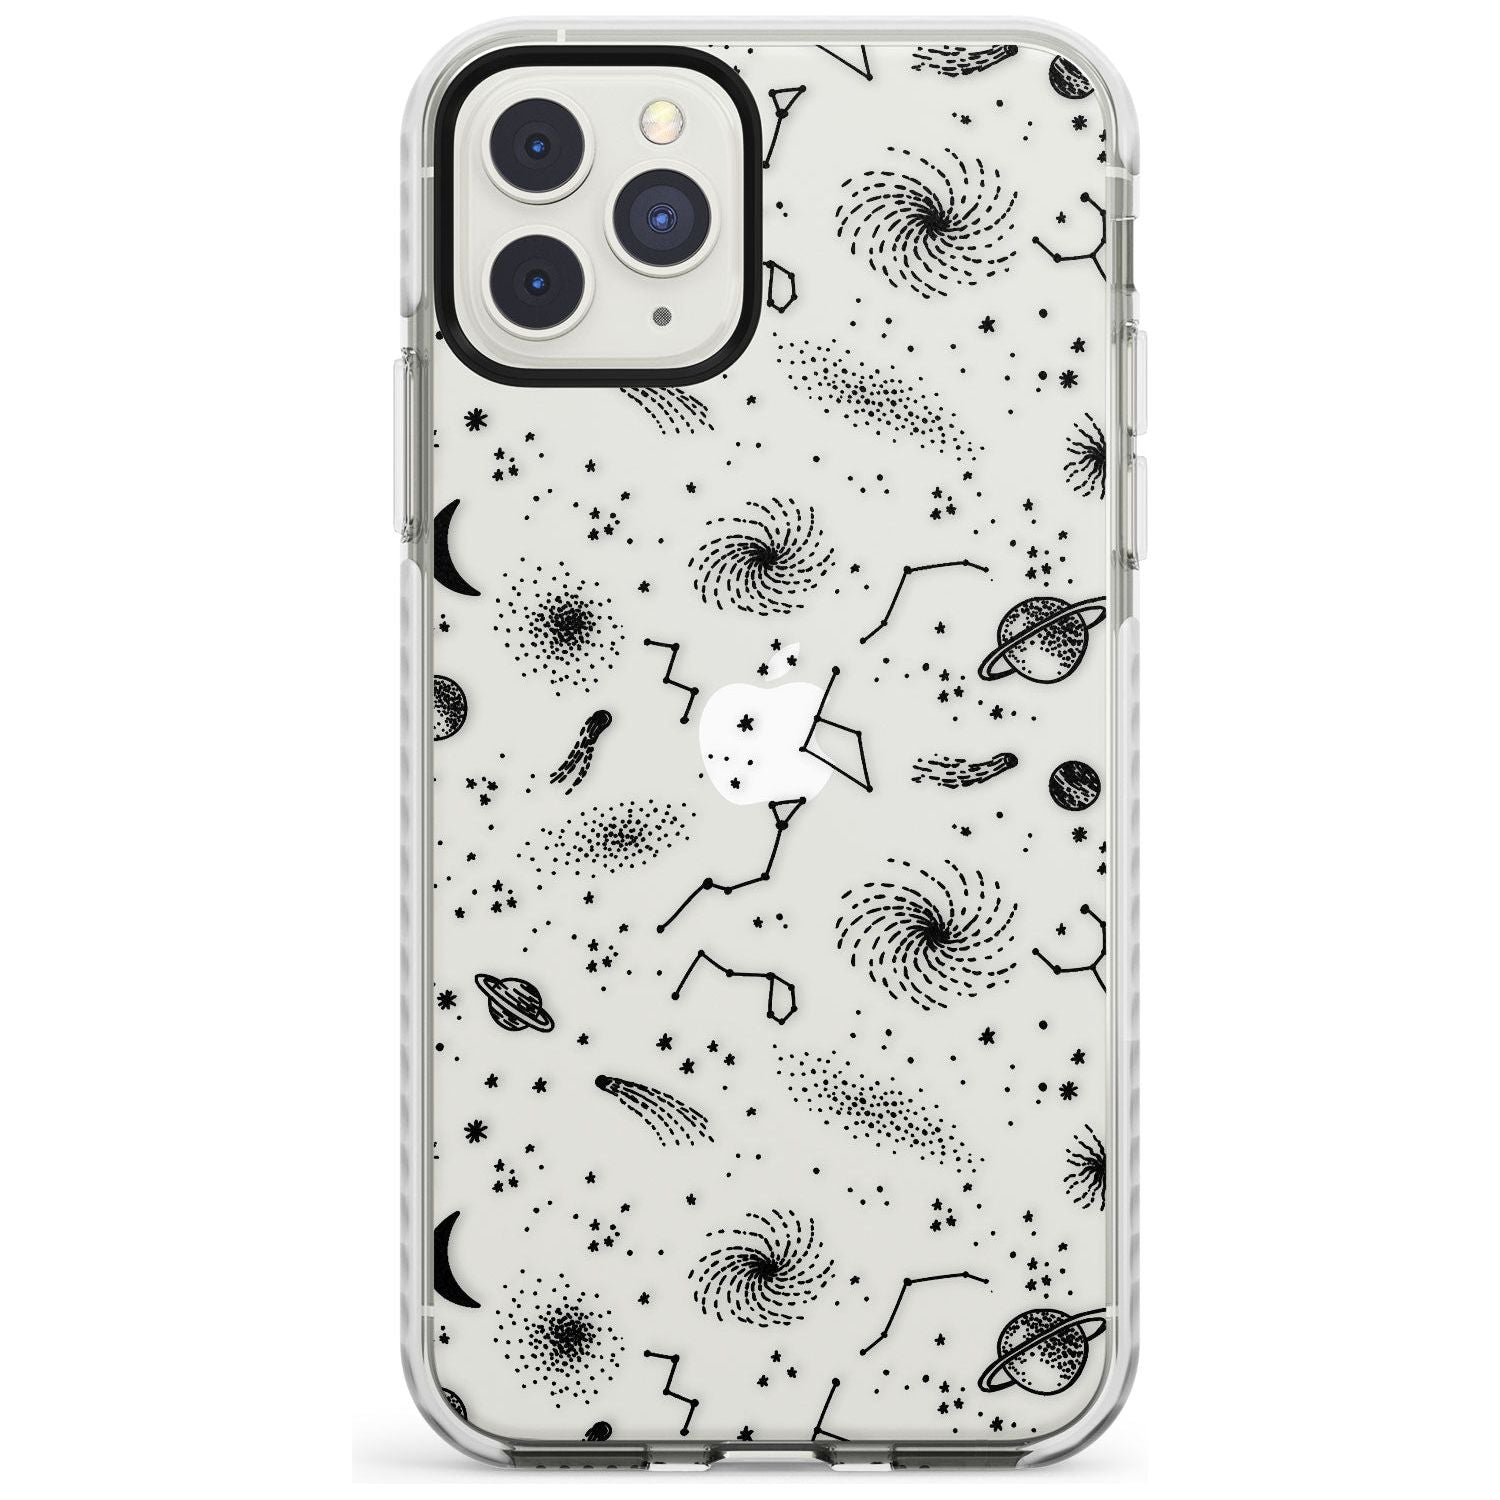 Mixed Galaxy Pattern Impact Phone Case for iPhone 11 Pro Max